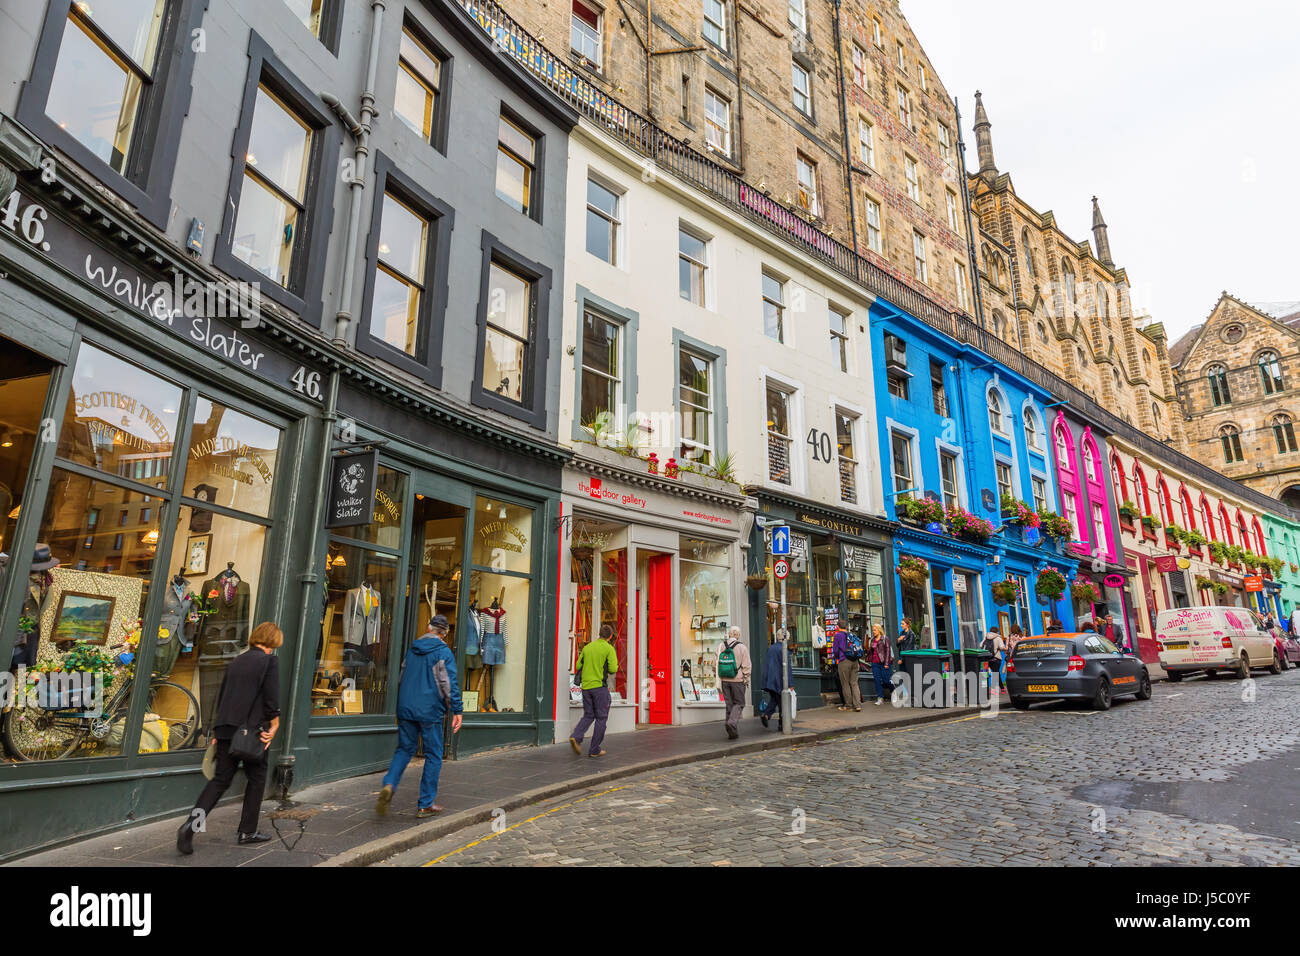 Edinburgh, Scotland, UK - September 12, 2106: Victoria Street in the Old Town with unidentified people. The old town with many Reformation-era buildin Stock Photo